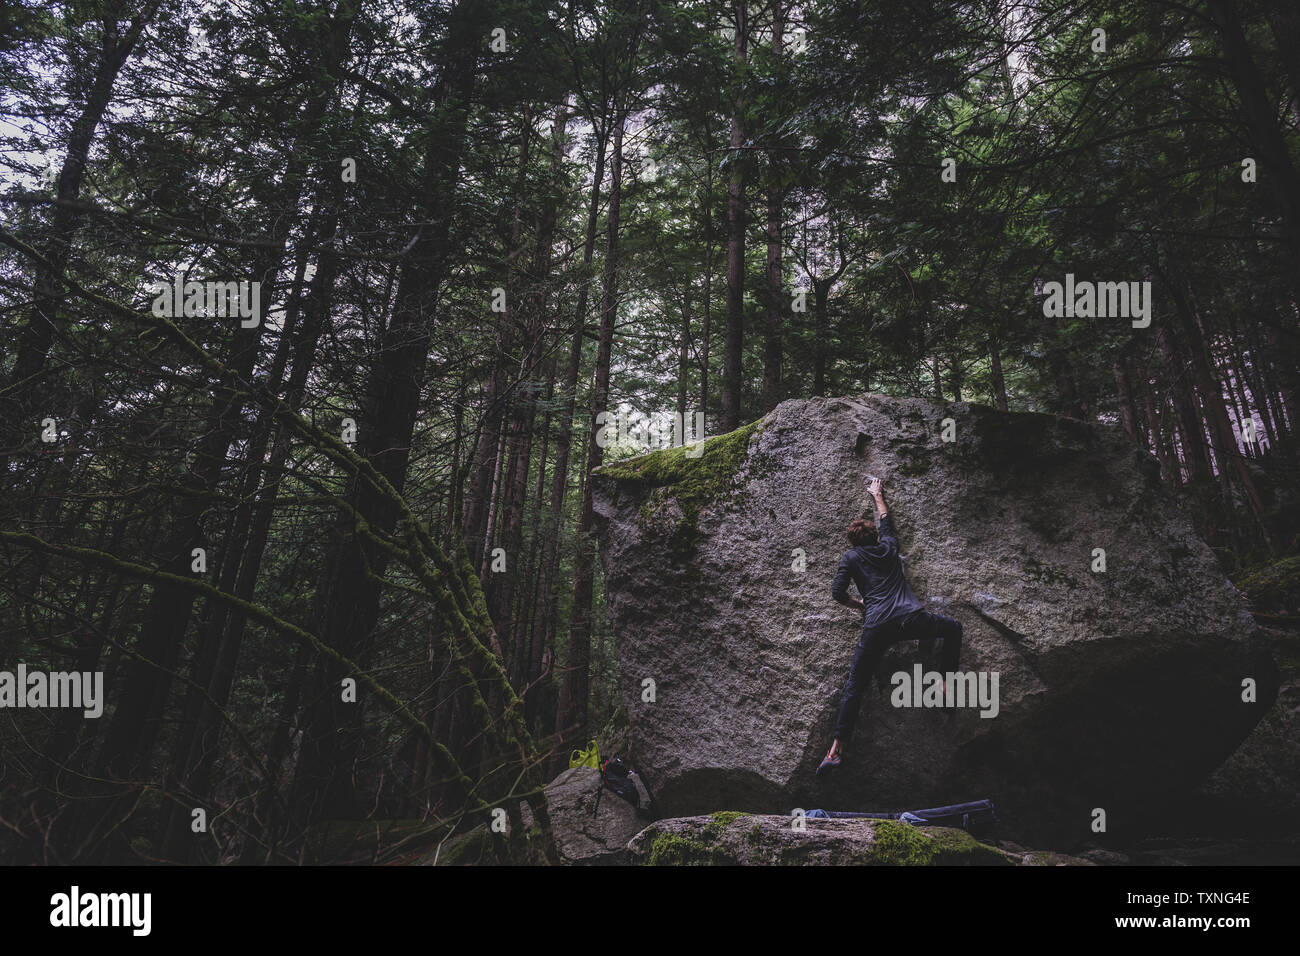 Climber bouldering in forest, Squamish, Canada Stock Photo